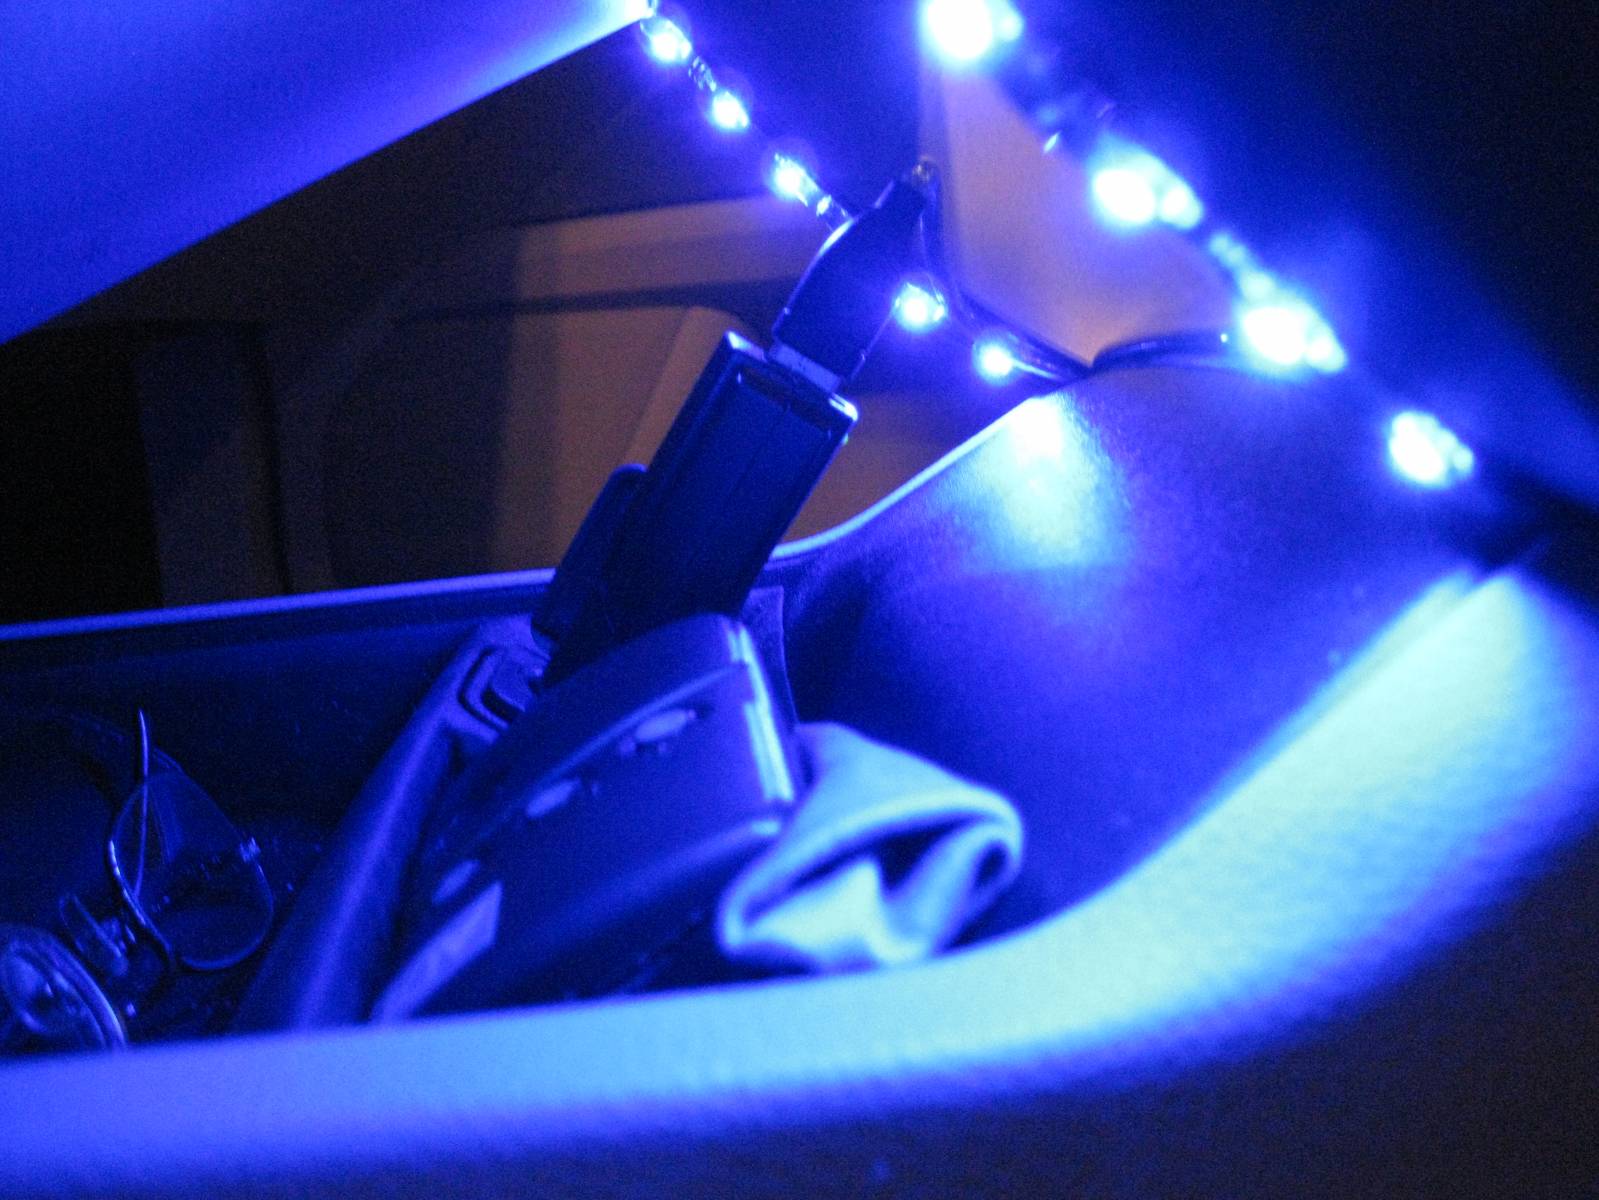 Blue LED's stuck to back of console struts.